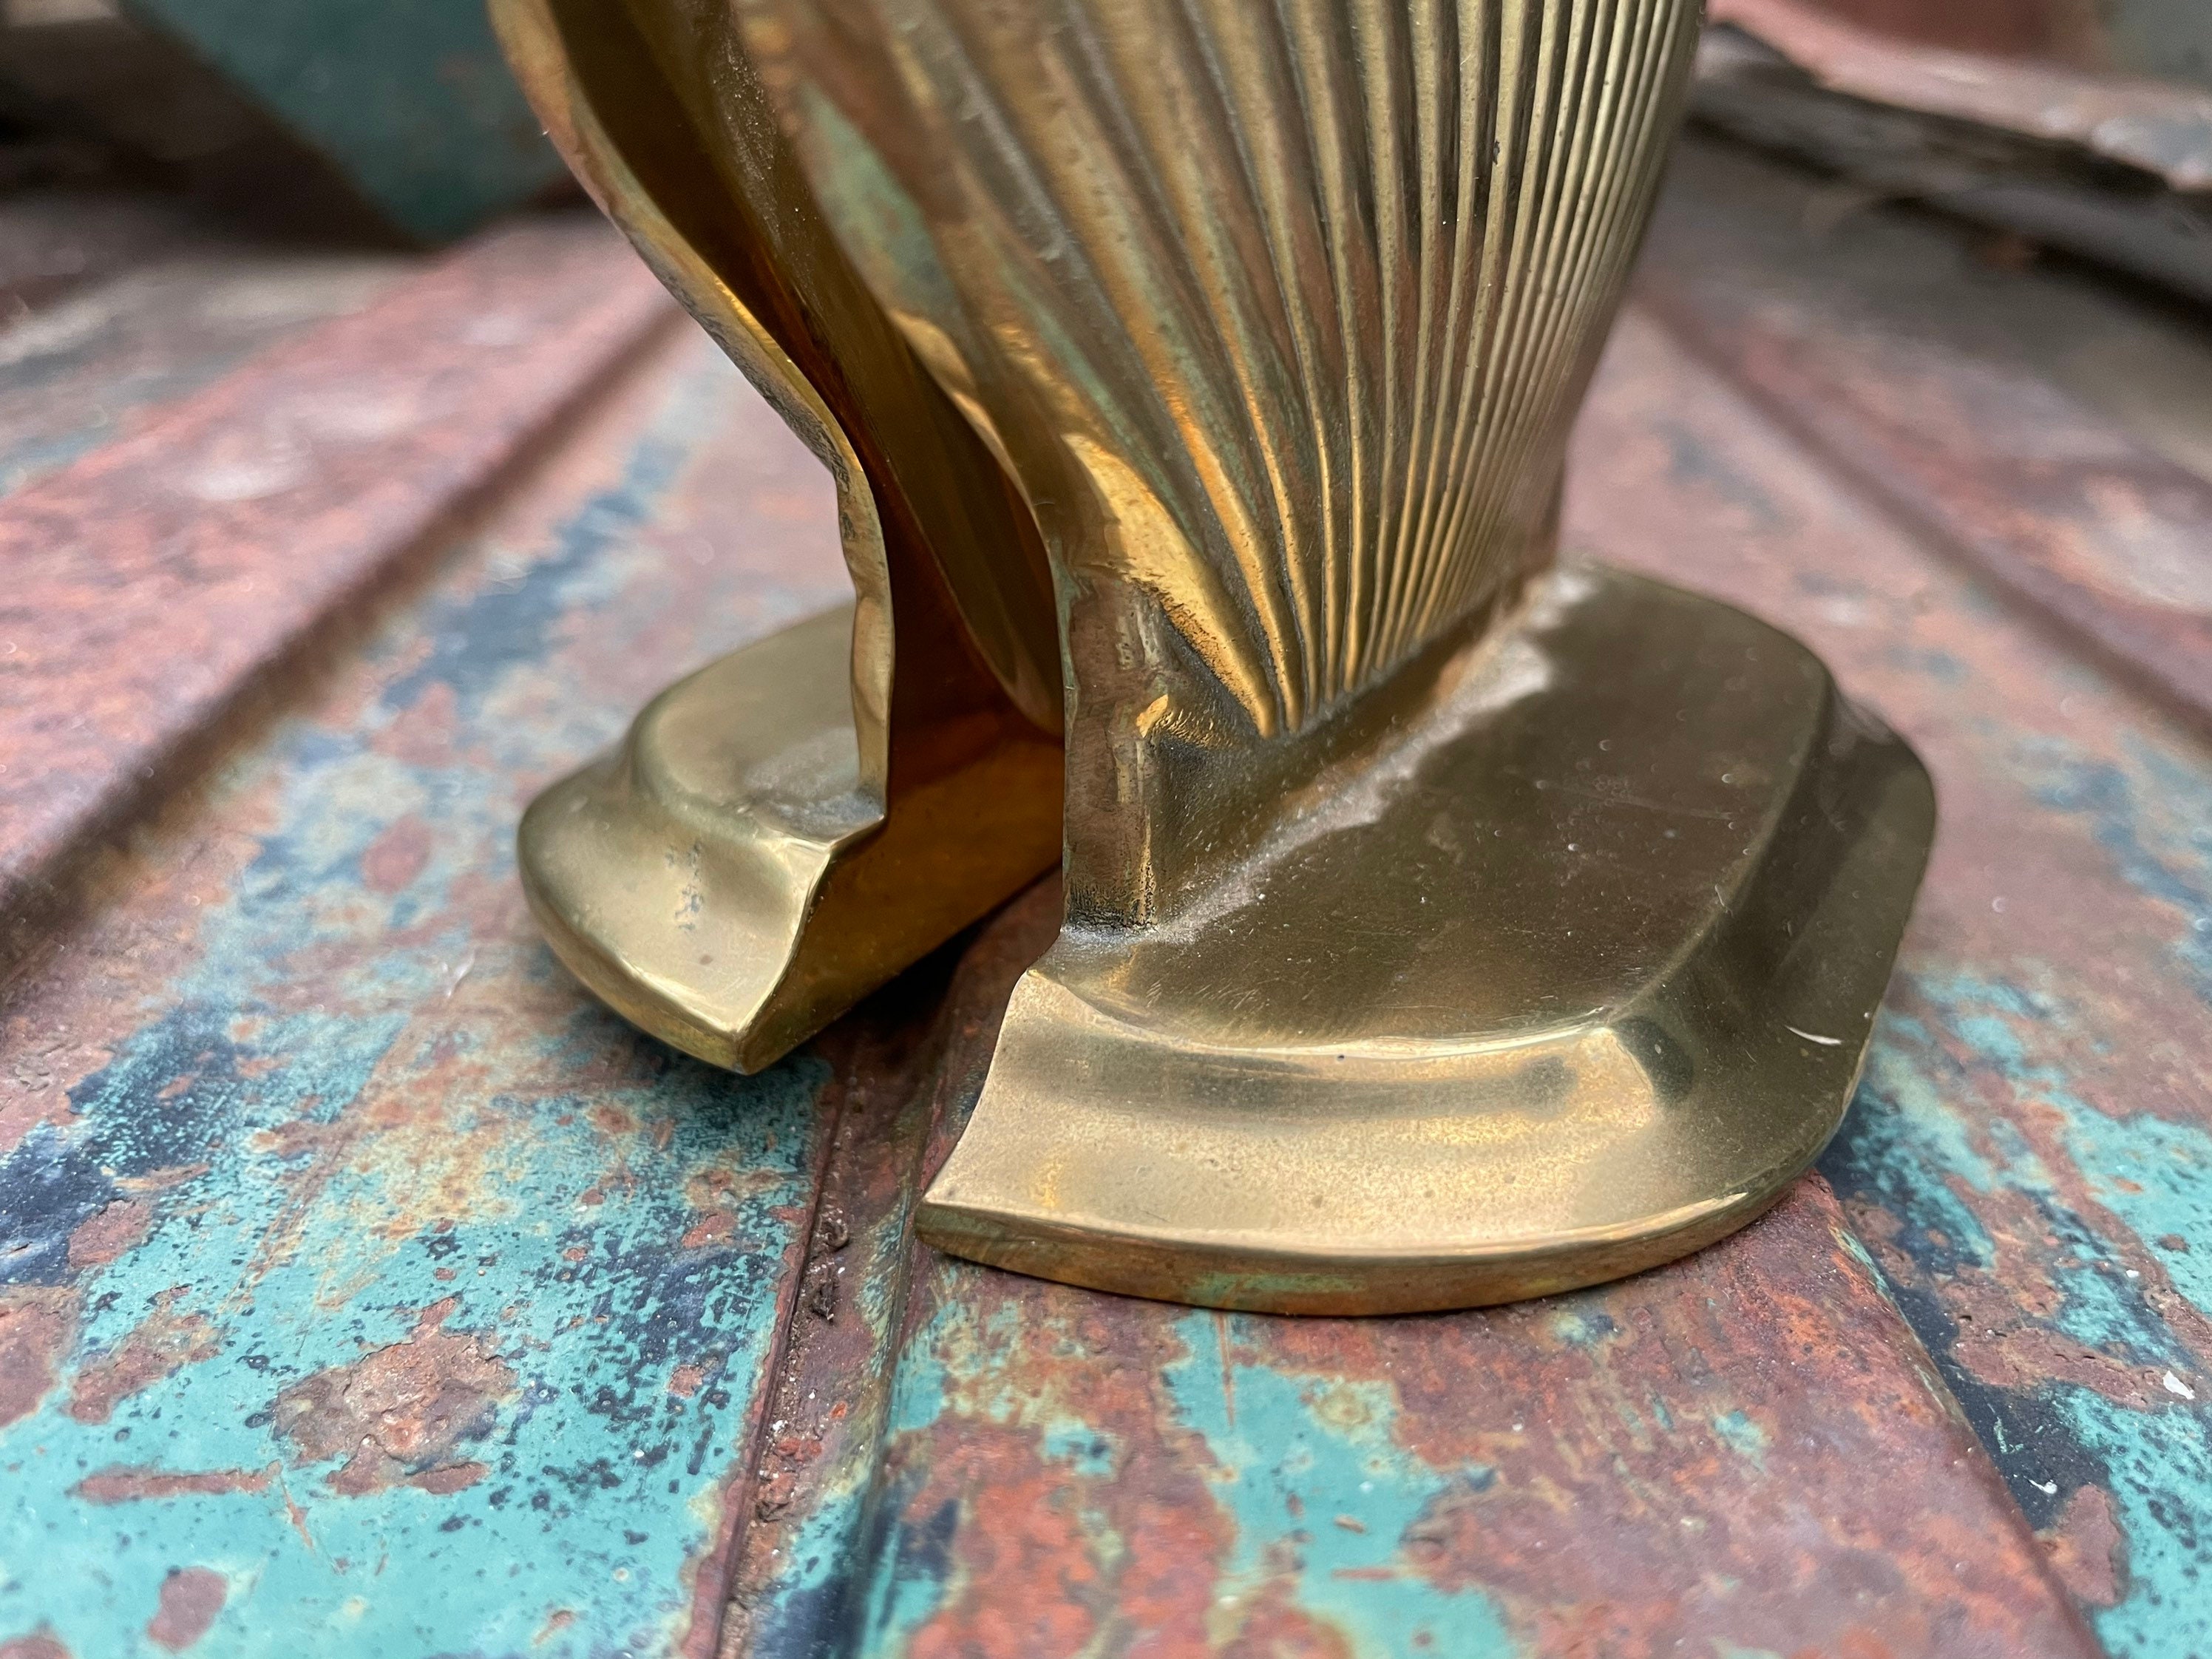 Pair Of Art Deco Brass Scalloped Shell Bookends